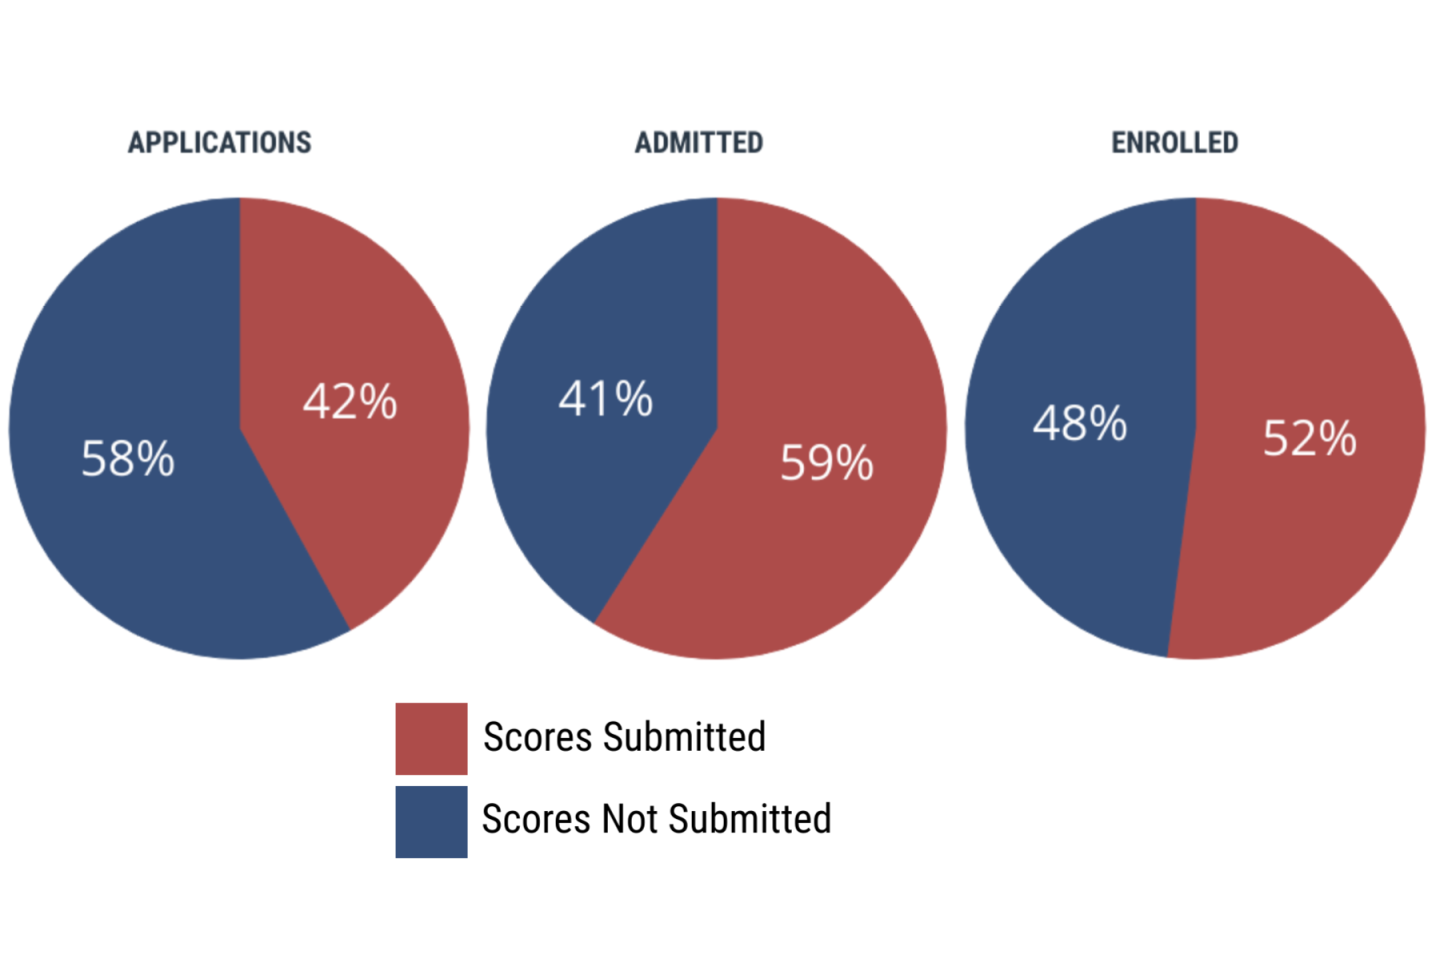 Percentage of students submitting test scores: Applied - 42% submitted, 58% not-submitted; Admitted: 59% submitted, 41% not-submitted; Enrolled: 52% submitted, 48% not-submitted